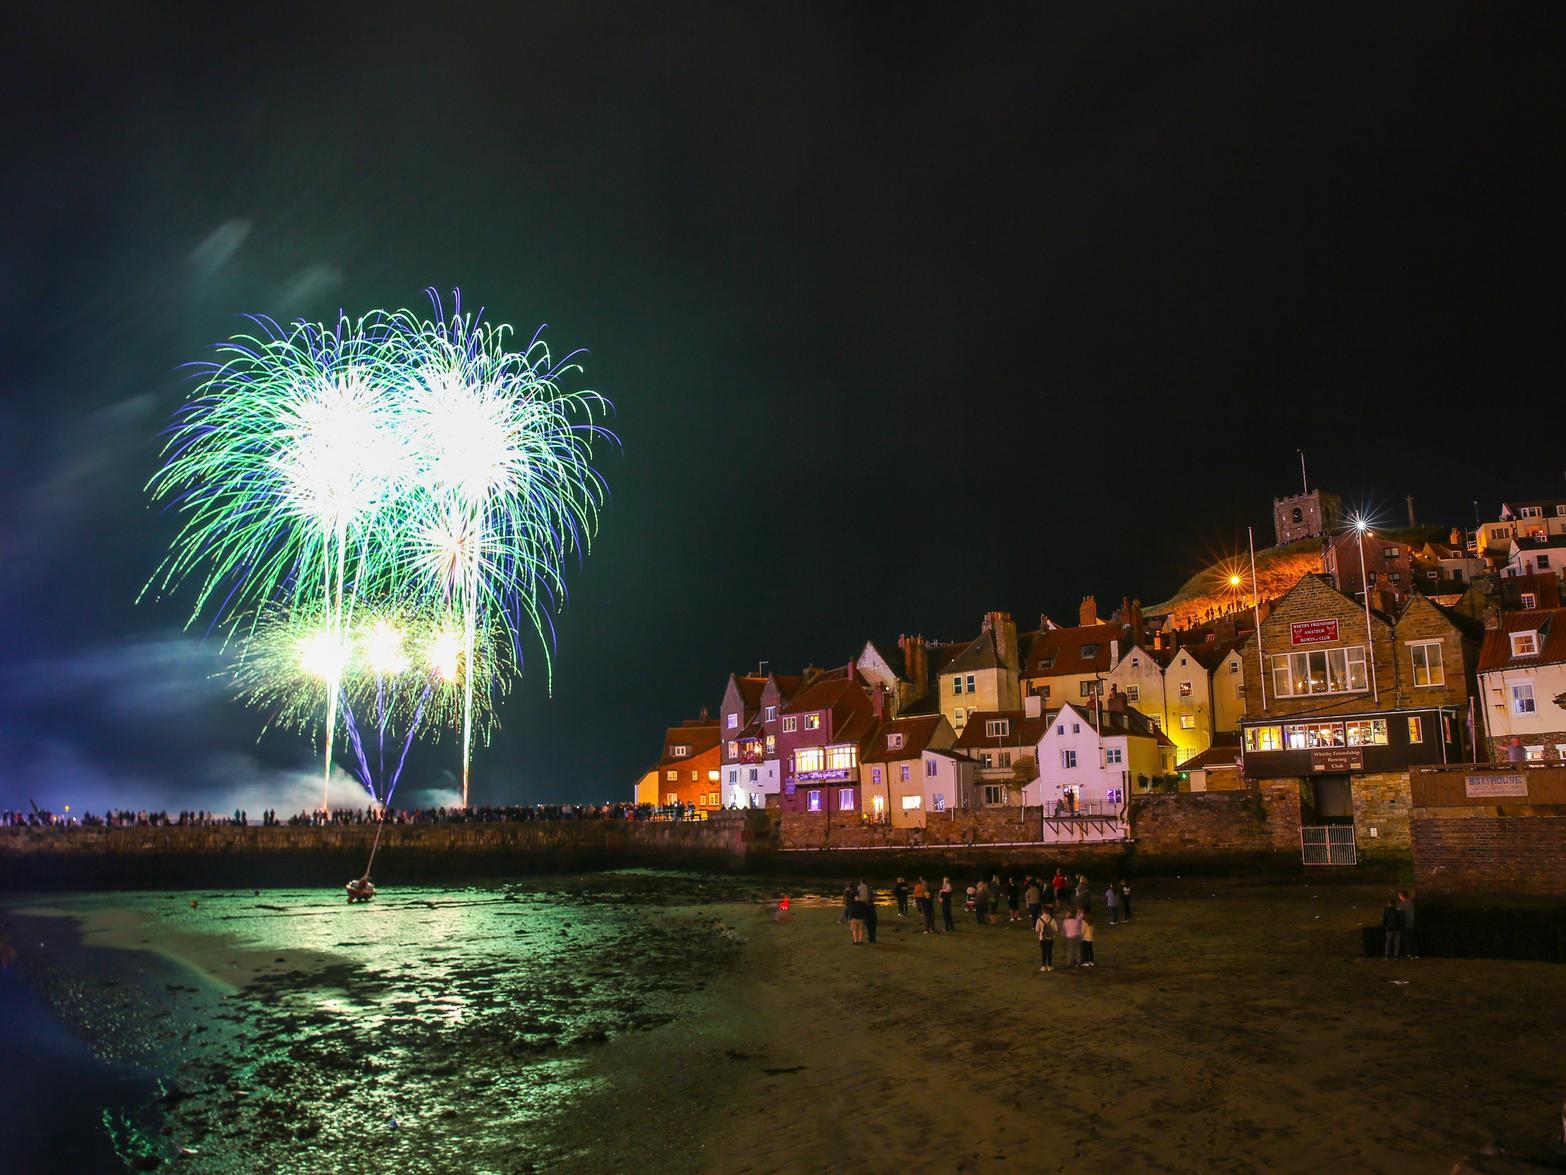 Whitby Regatta, Saturday August 15 to Monday August 17

Weekend of entertainment, embracing yacht racing, rowing races and various free forms of entertainment finishing with a prize presentation and spectacular firework display.